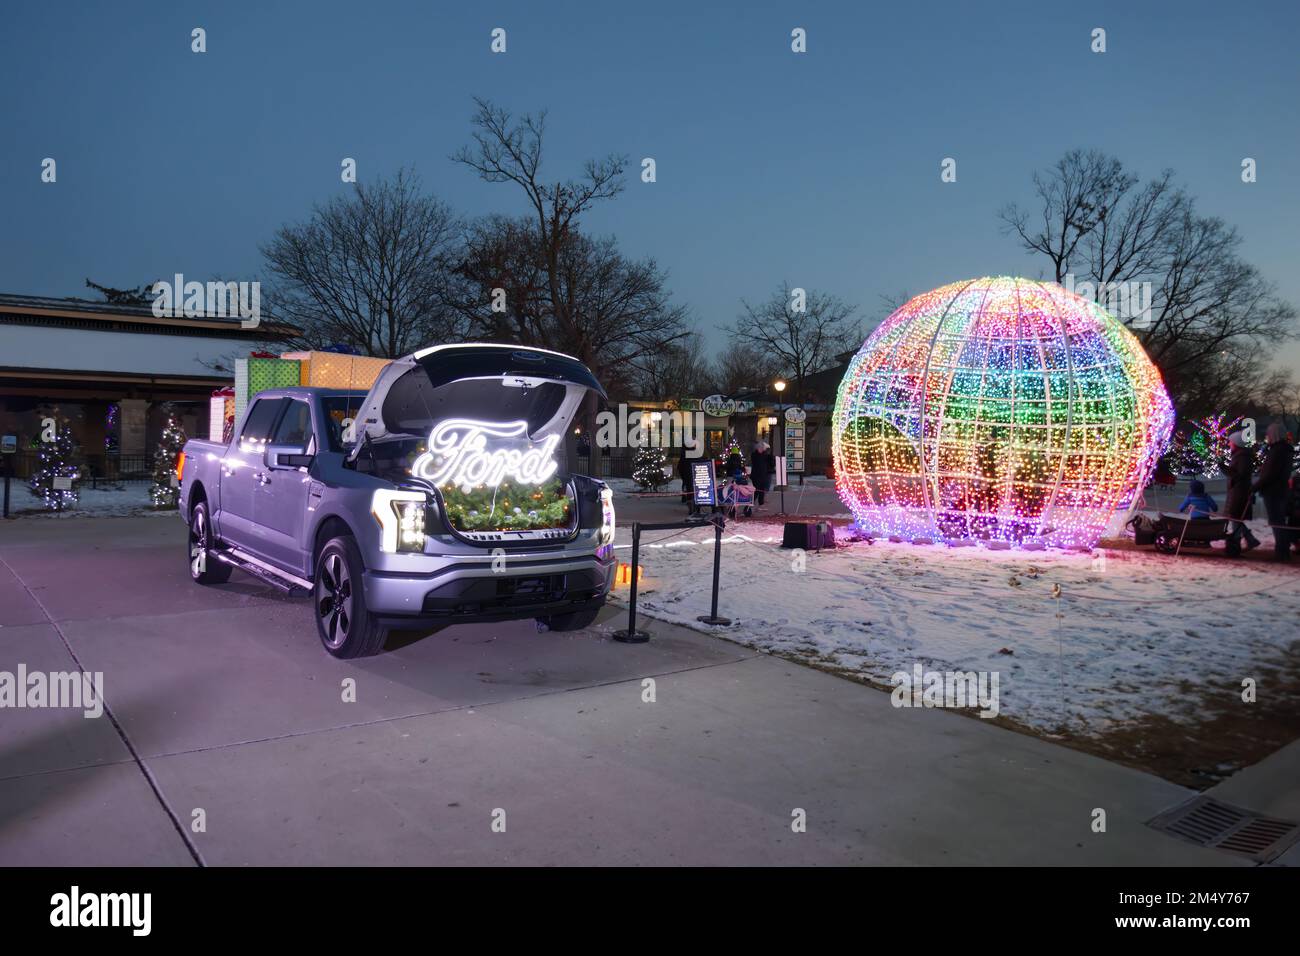 Fored F150 Lightning electric pickup truck on display. The truck is powering the lights of the big globe. Stock Photo